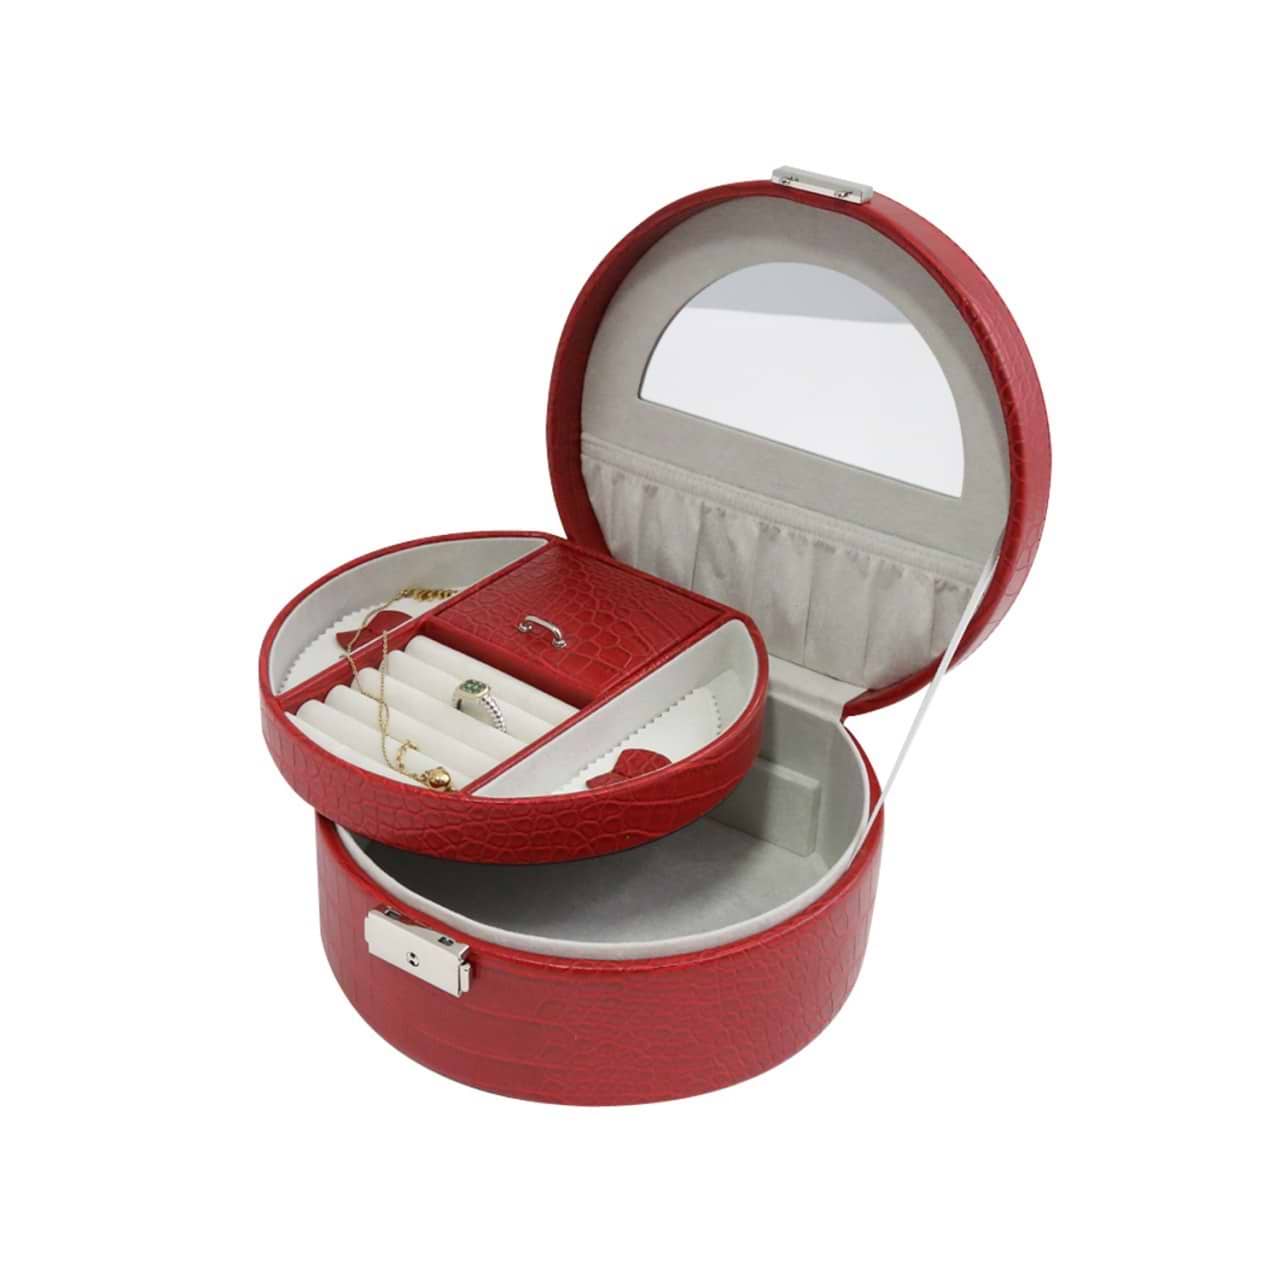 Red Leatherette Jewelry Box w/ Valet, Slots for Rings, & Compartments